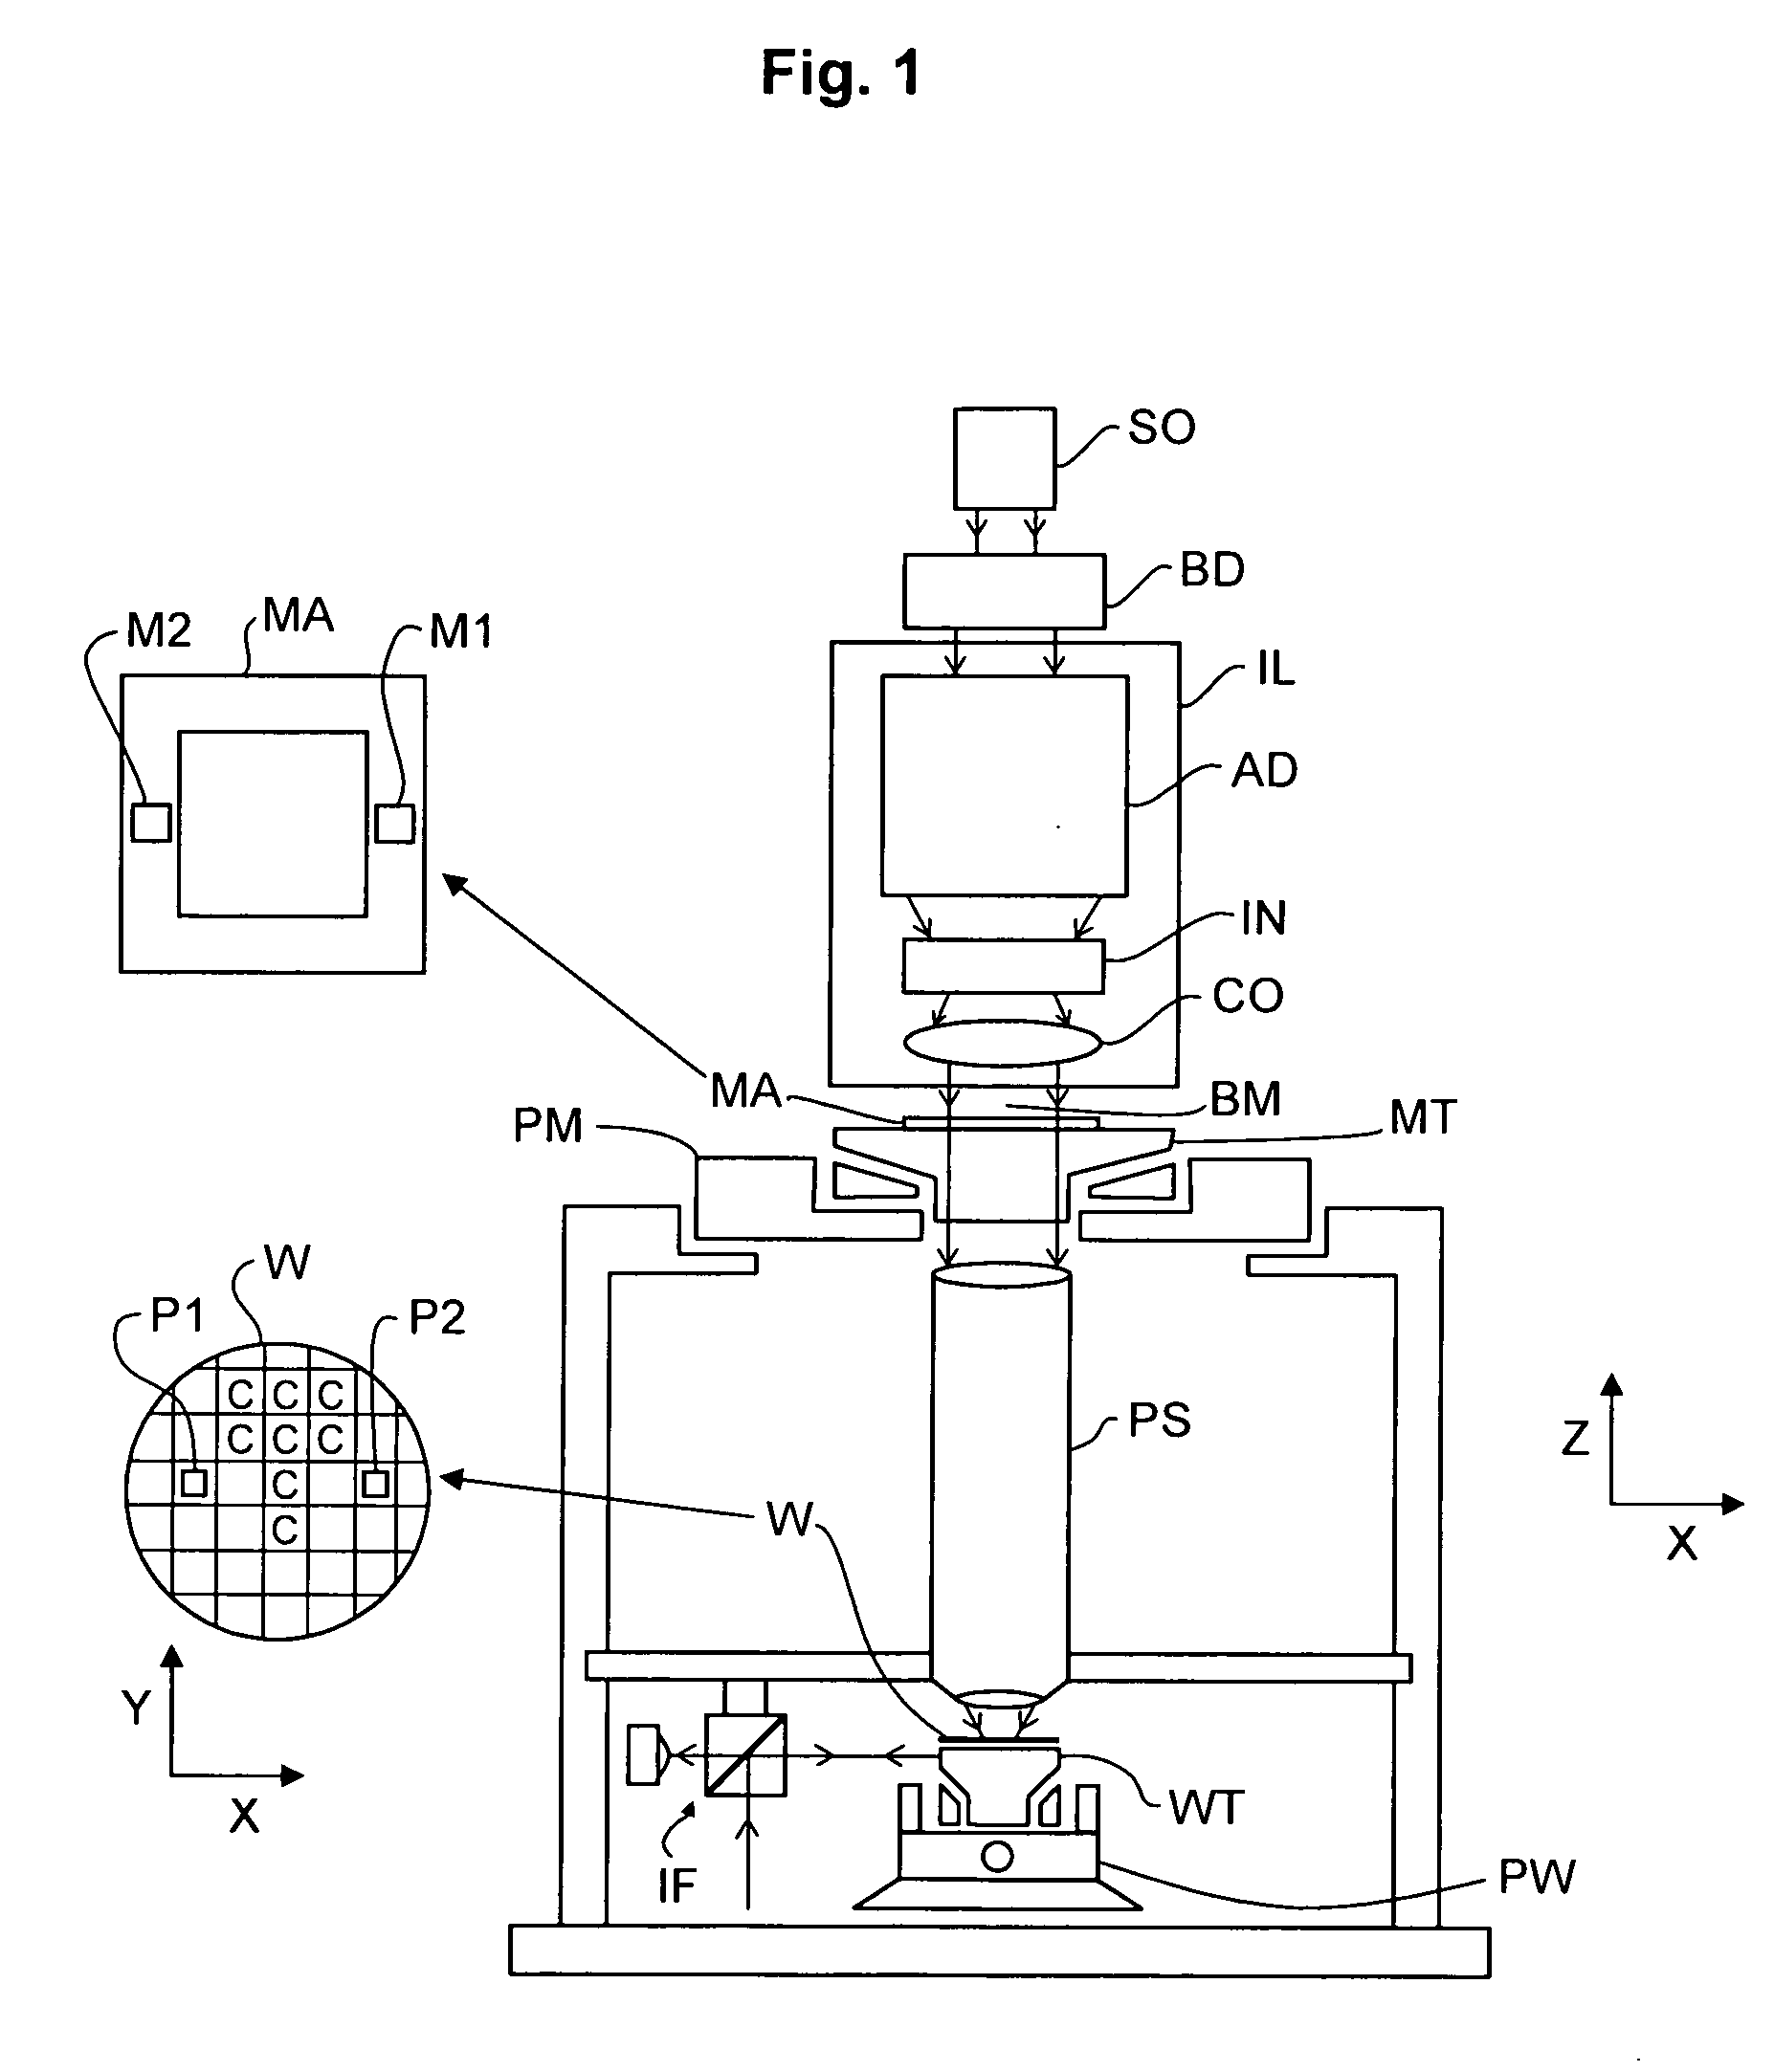 Lithographic apparatus having a controlled motor, and motor control system and method